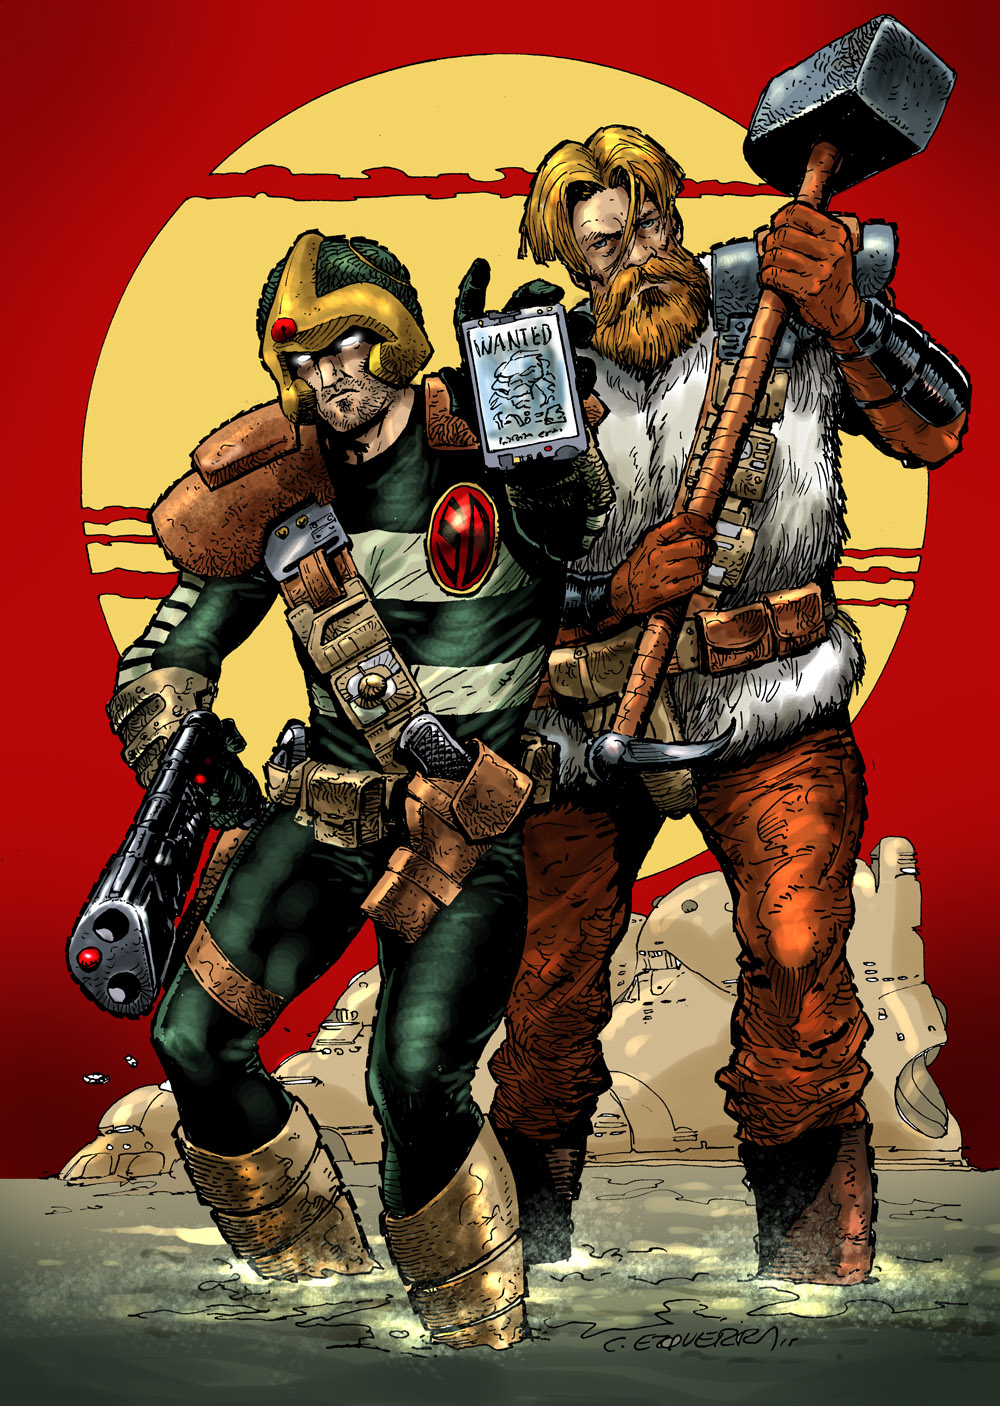 Inspirational: Search and Destroy - Strontium Dog by Carlos Ezquerra